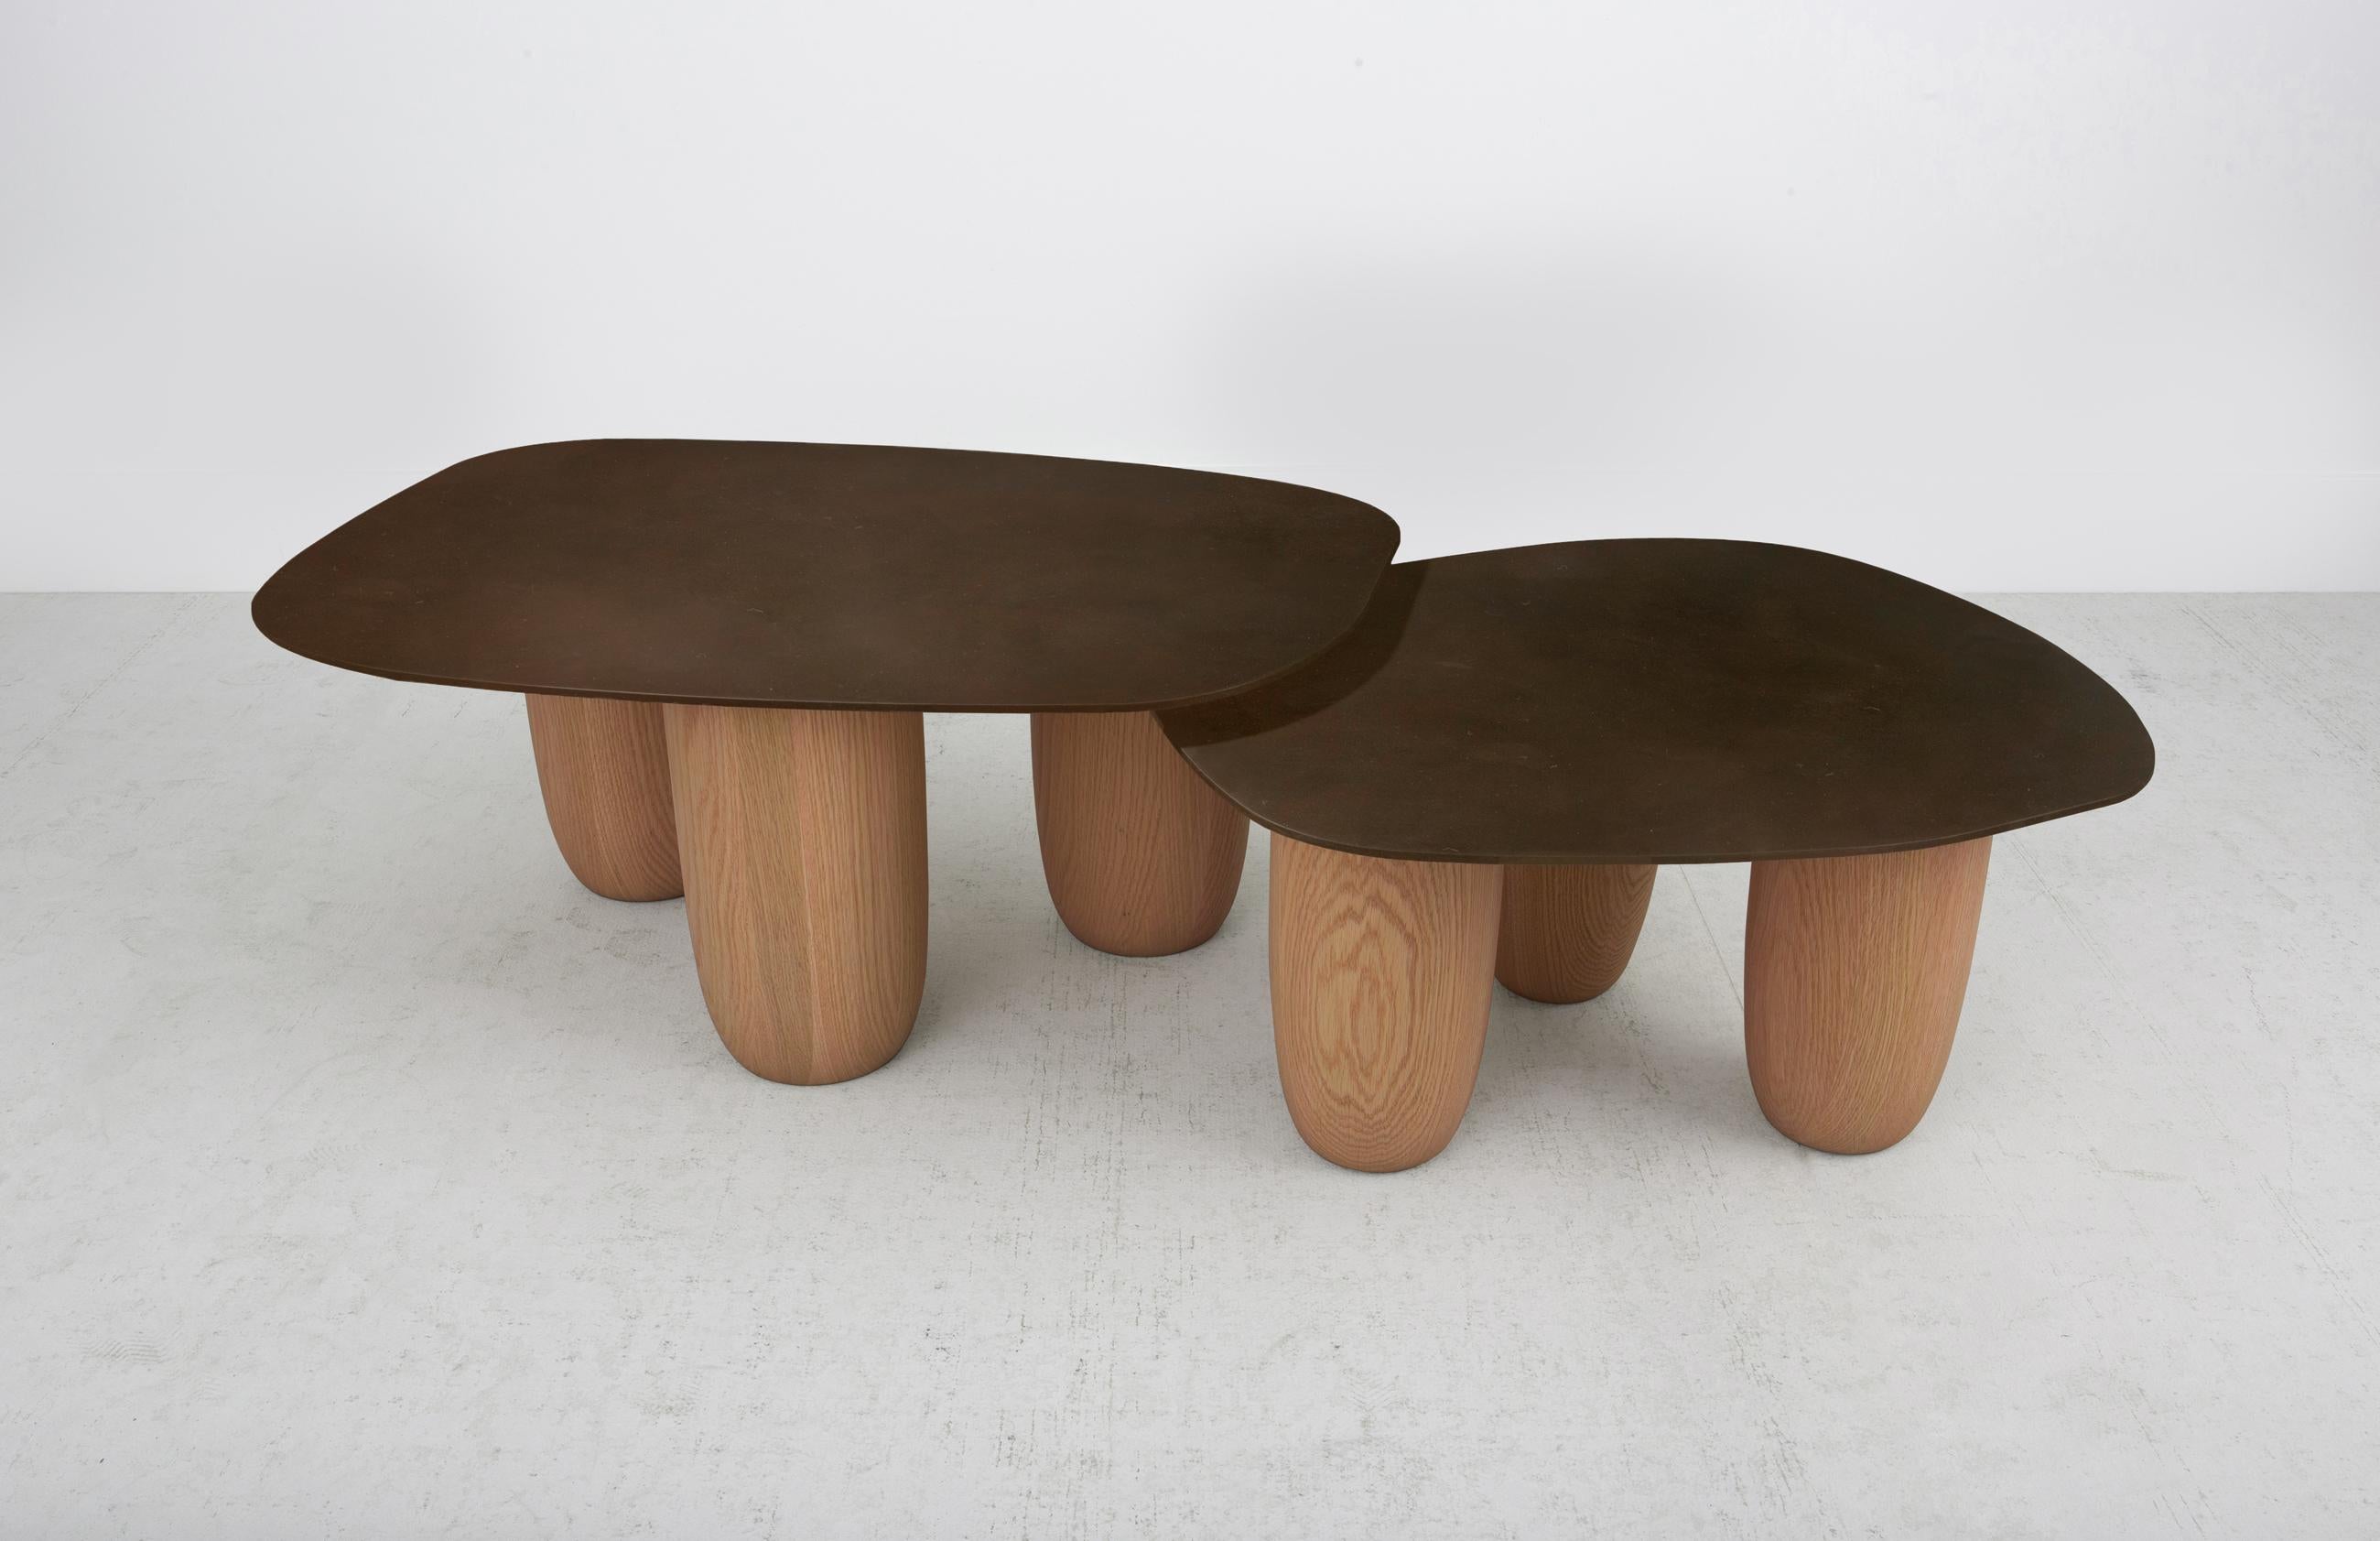 Minimalist Low Tables Japanese Brown Patina Steel with Oak Legs Vivian Carbonell For Sale 3